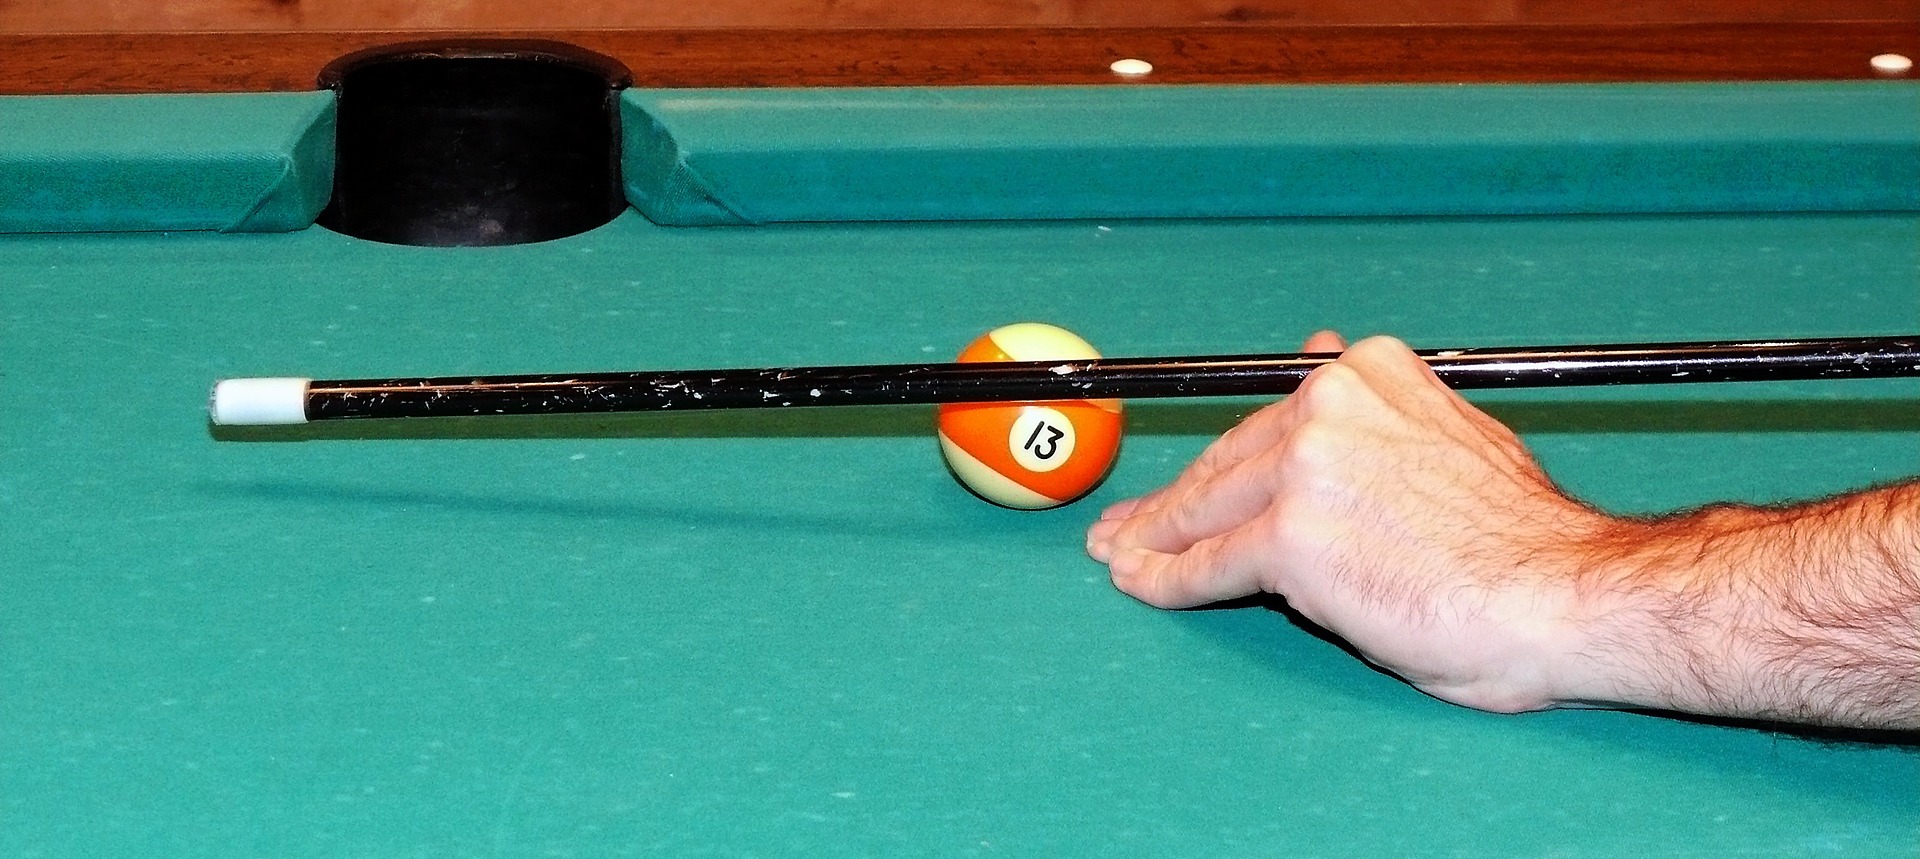 How To Burnish A Pool Cue Shaft?